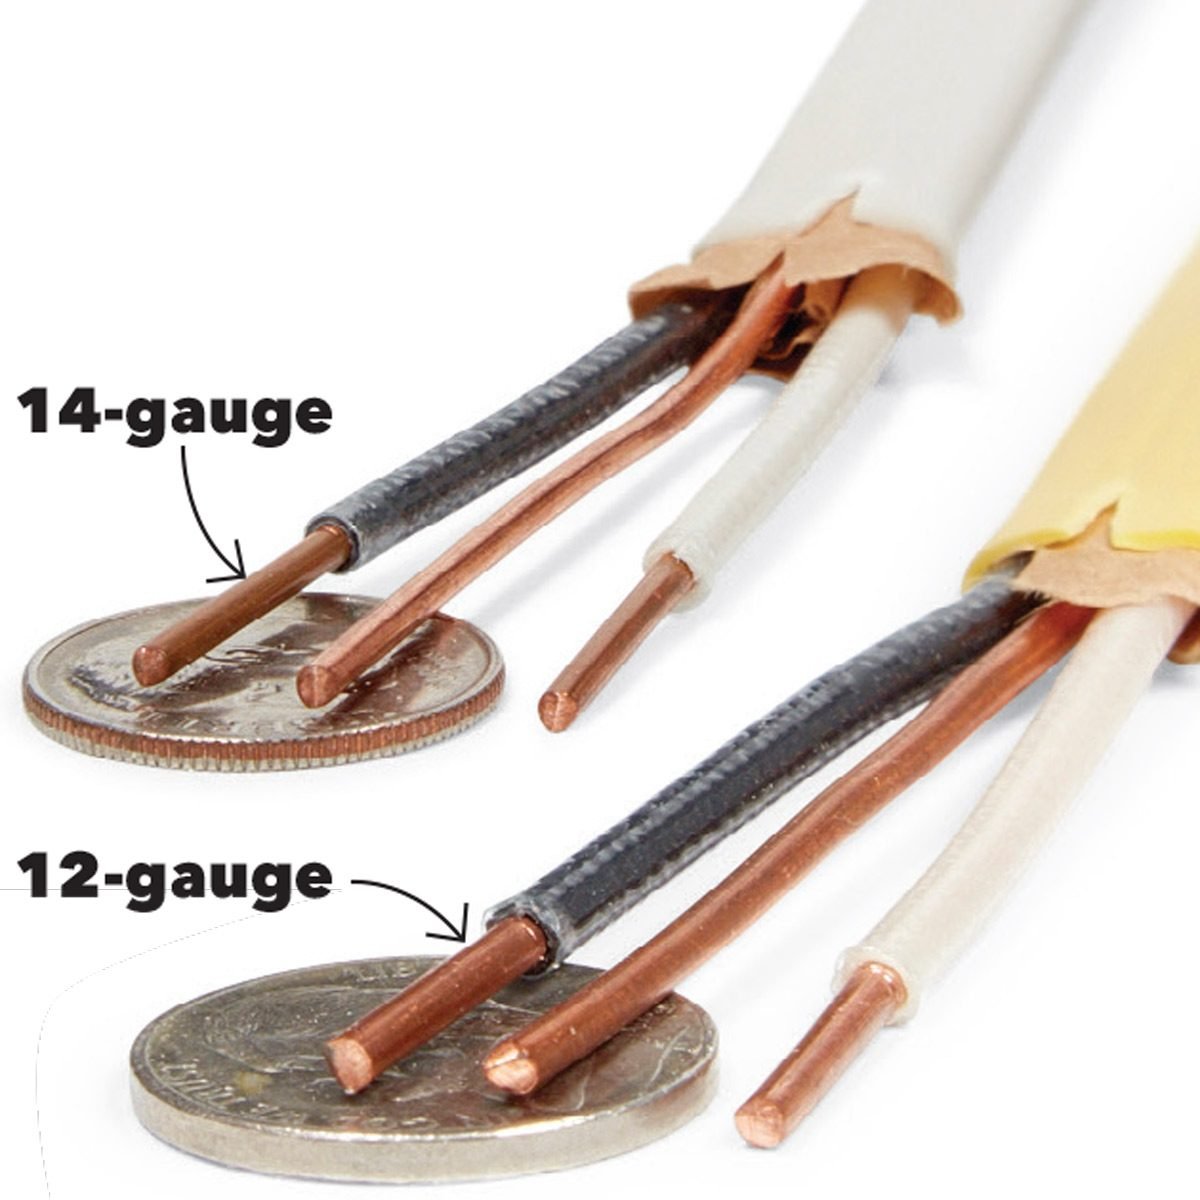 what size wire for woodworking?